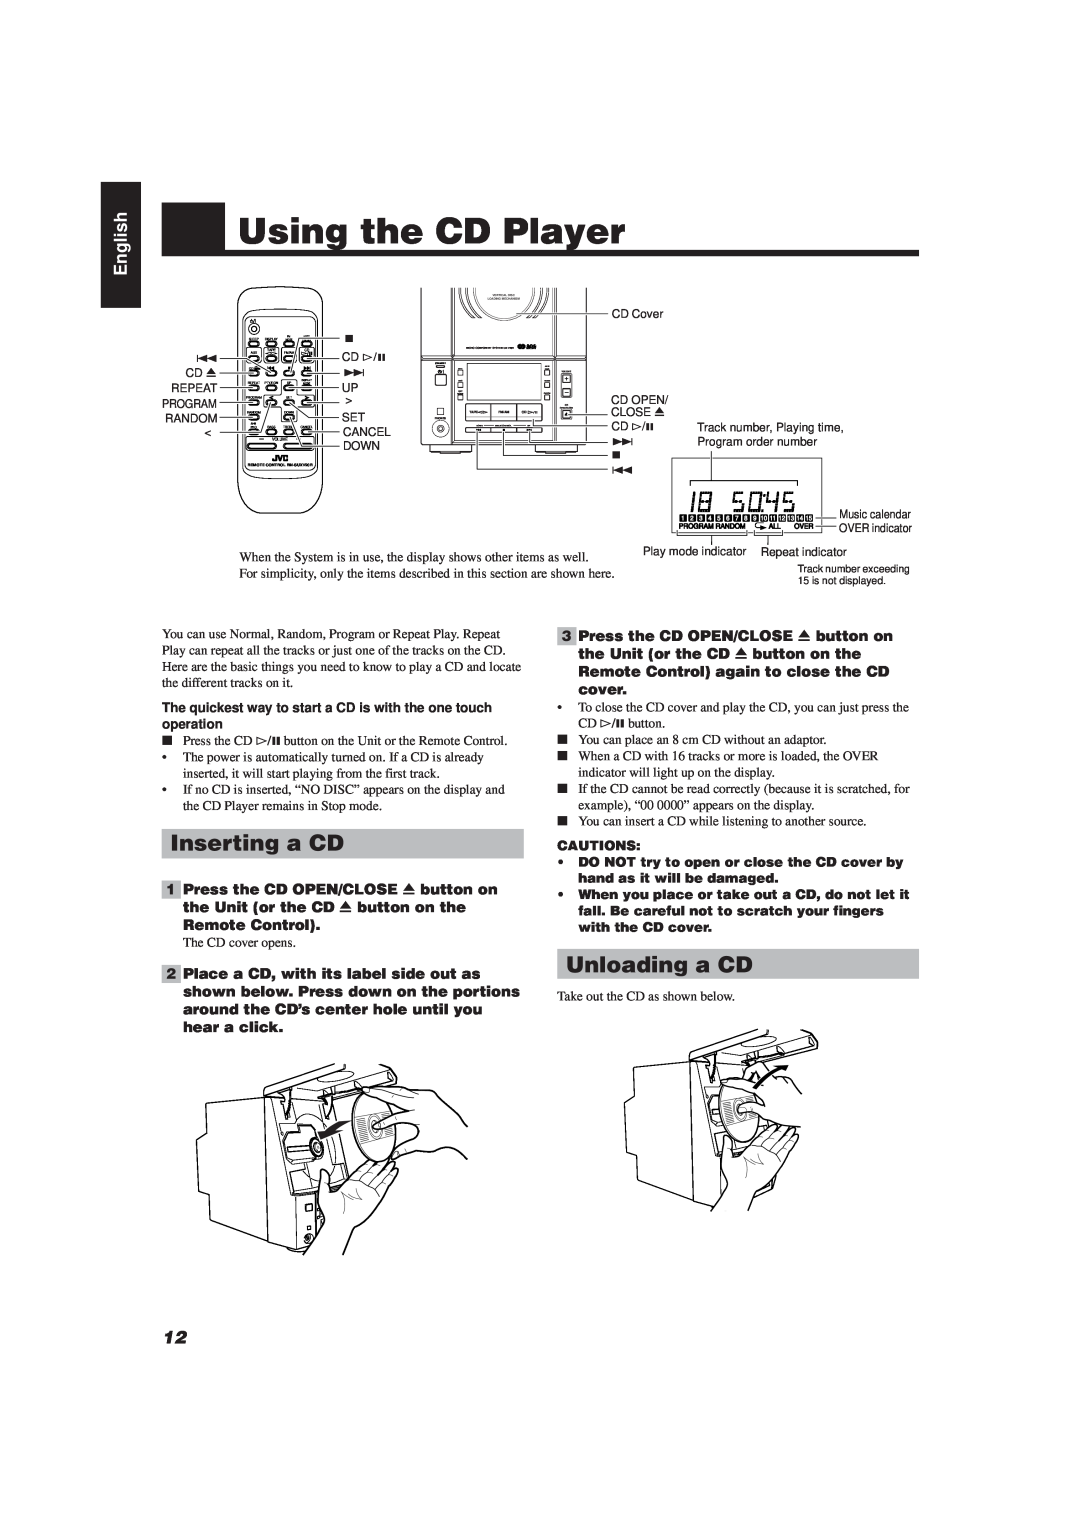 JVC UX-V20R, UX-V10 manual Using the CD Player, Inserting a CD, Unloading a CD, English, Take out the CD as shown below 